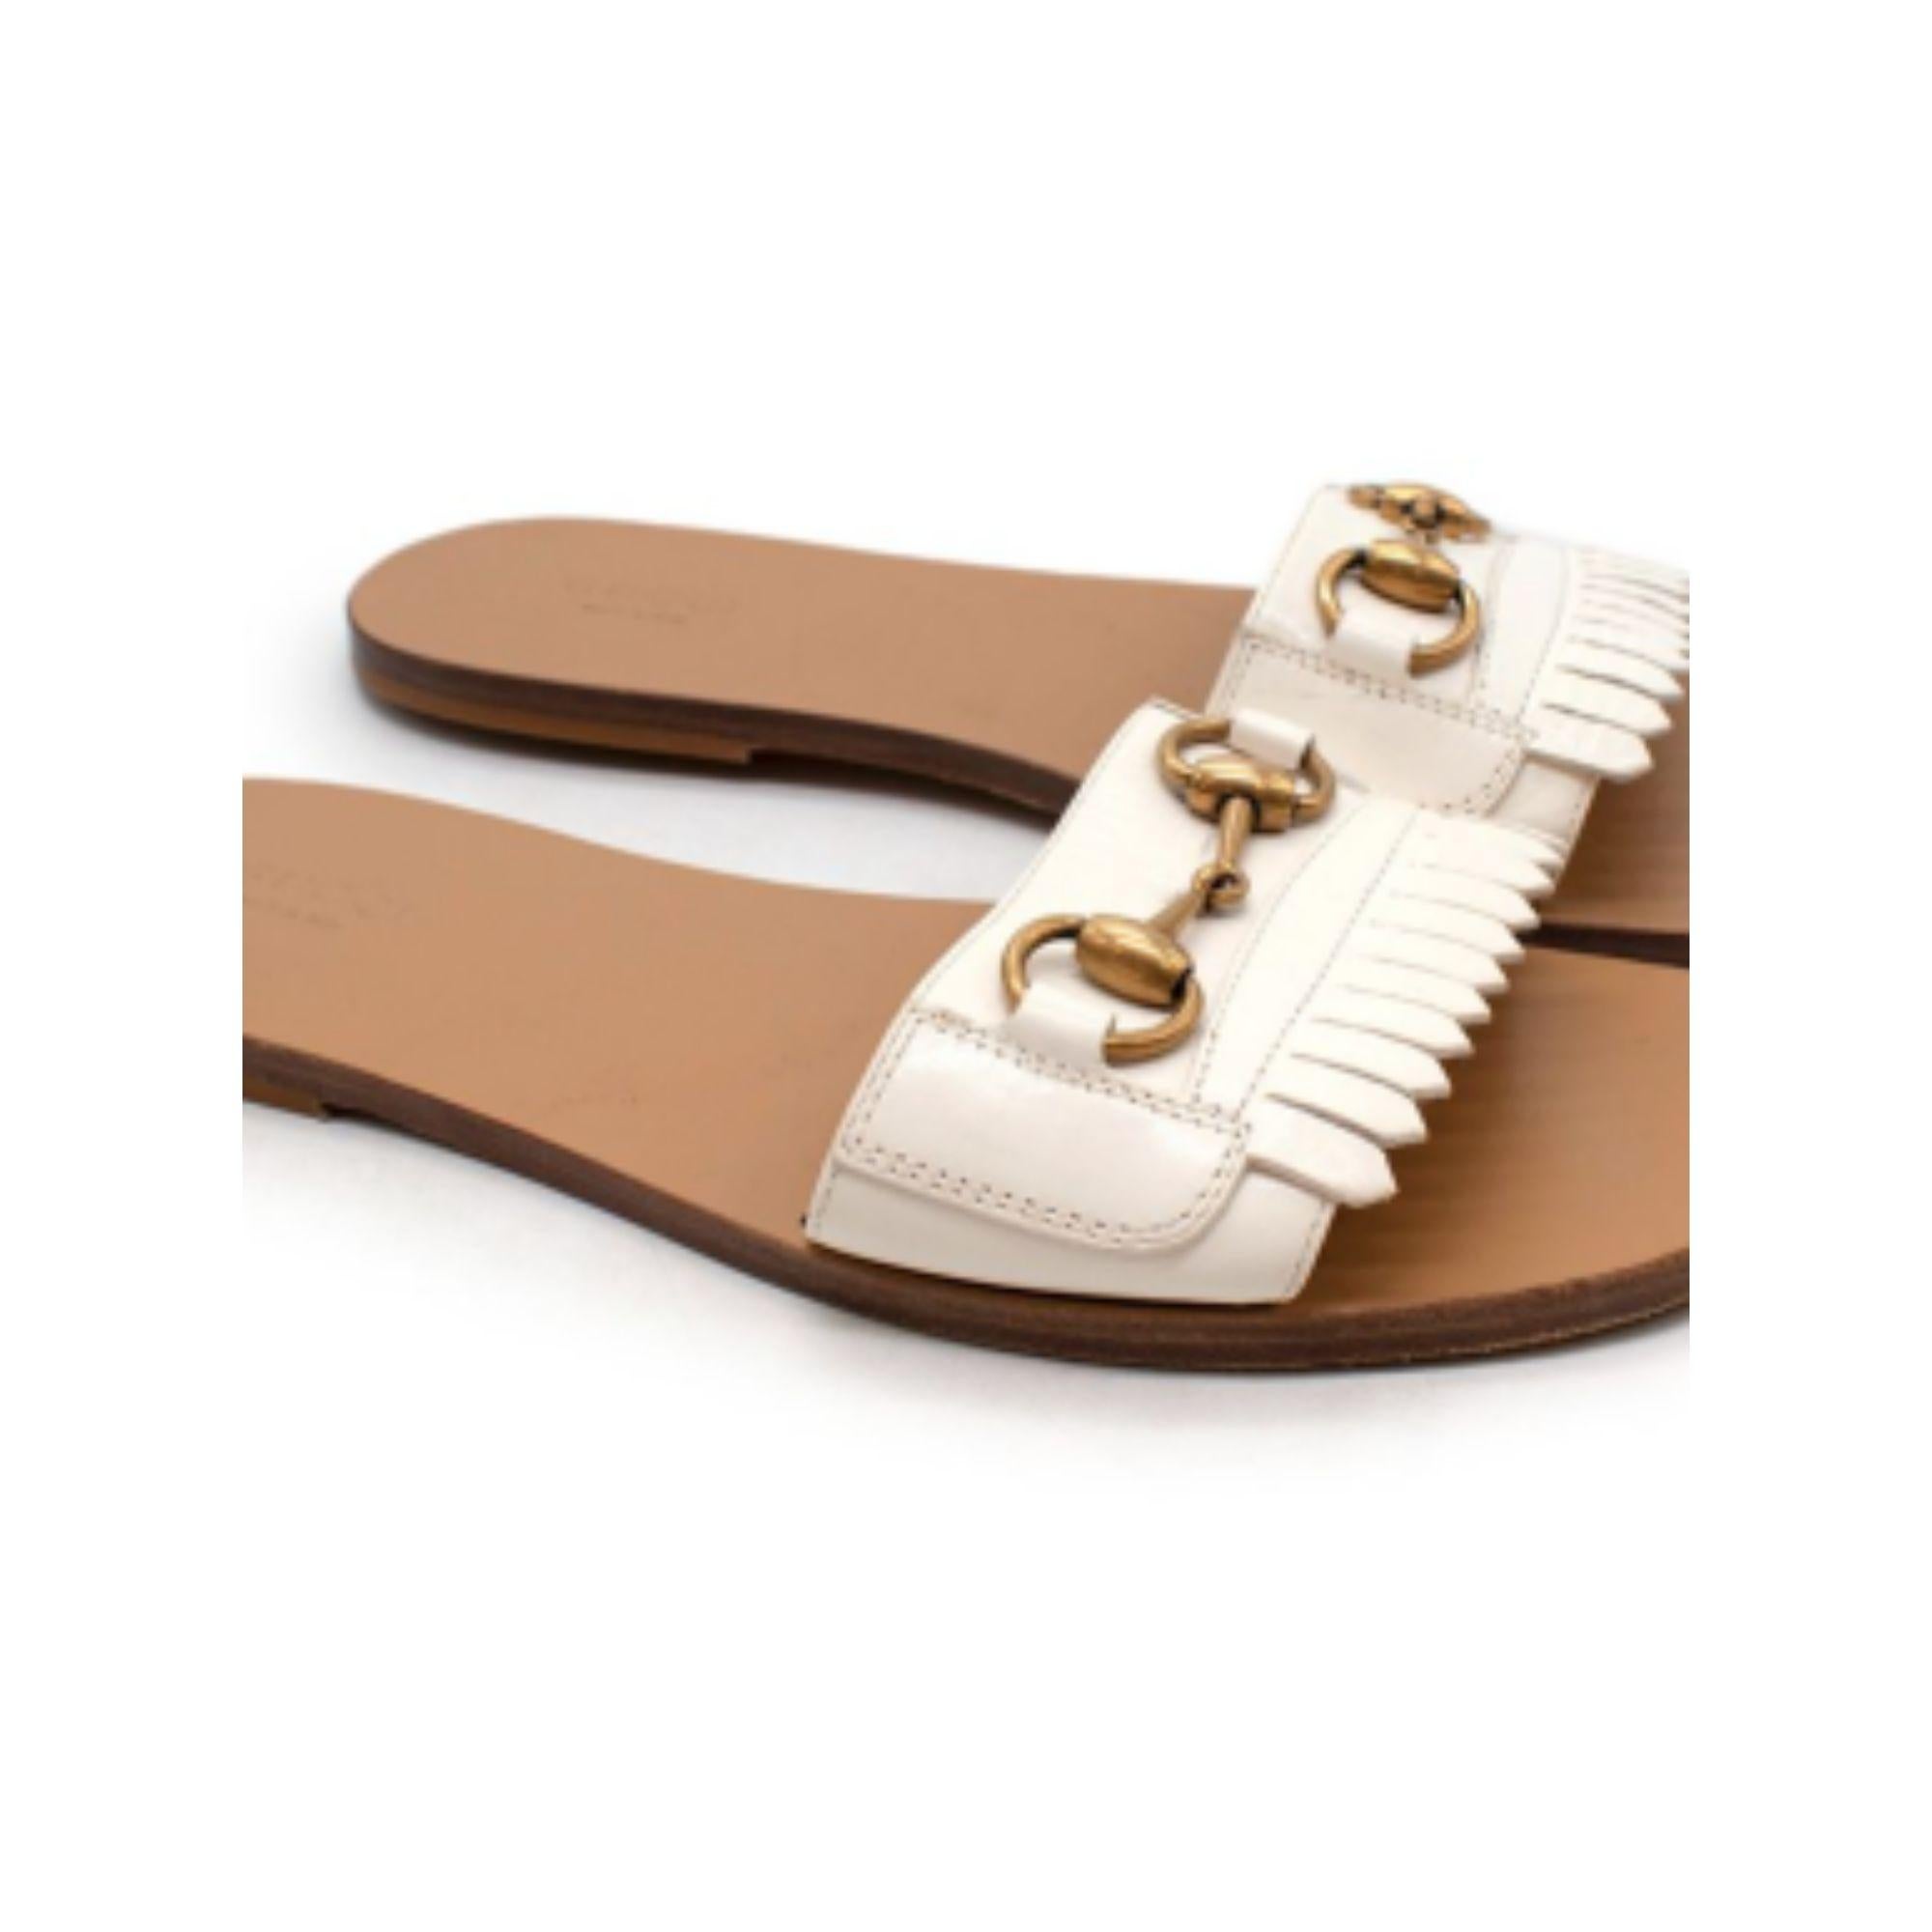 Gucci Horsebit-detailed fringed leather slides

- Branded and leathered soles
- White firing leather details
- Gold buckle
- Slide-on

Material
Leather

Made in Italy

9.5/10 Excellent condition

PLEASE NOTE, THESE ITEMS ARE PRE-OWNED AND MAY SHOW